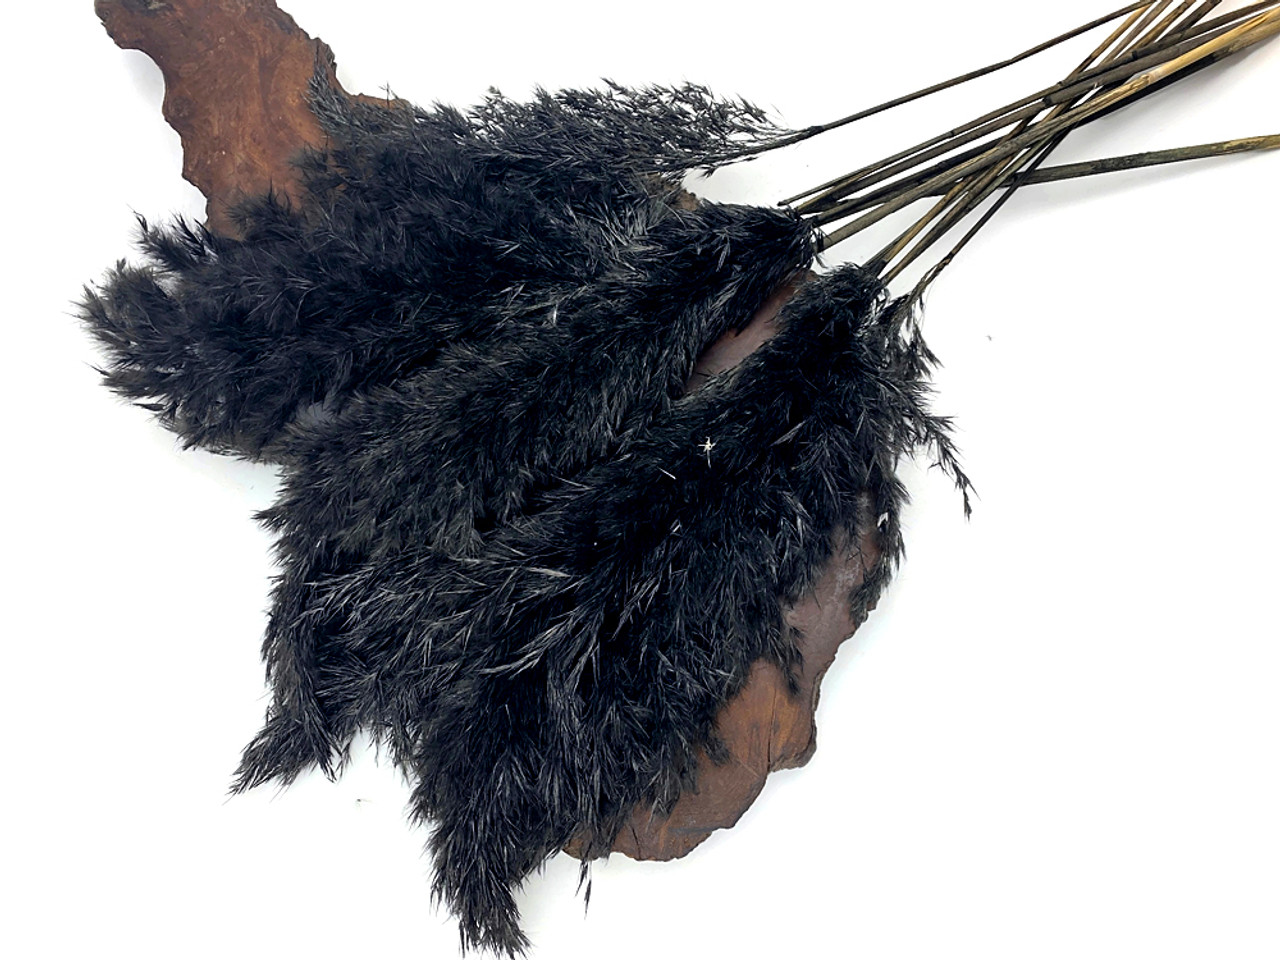 5 Pieces - 18-20 Dyed Black Preserved Dried Plume Pampas Reed Grass | Moonlight Feather